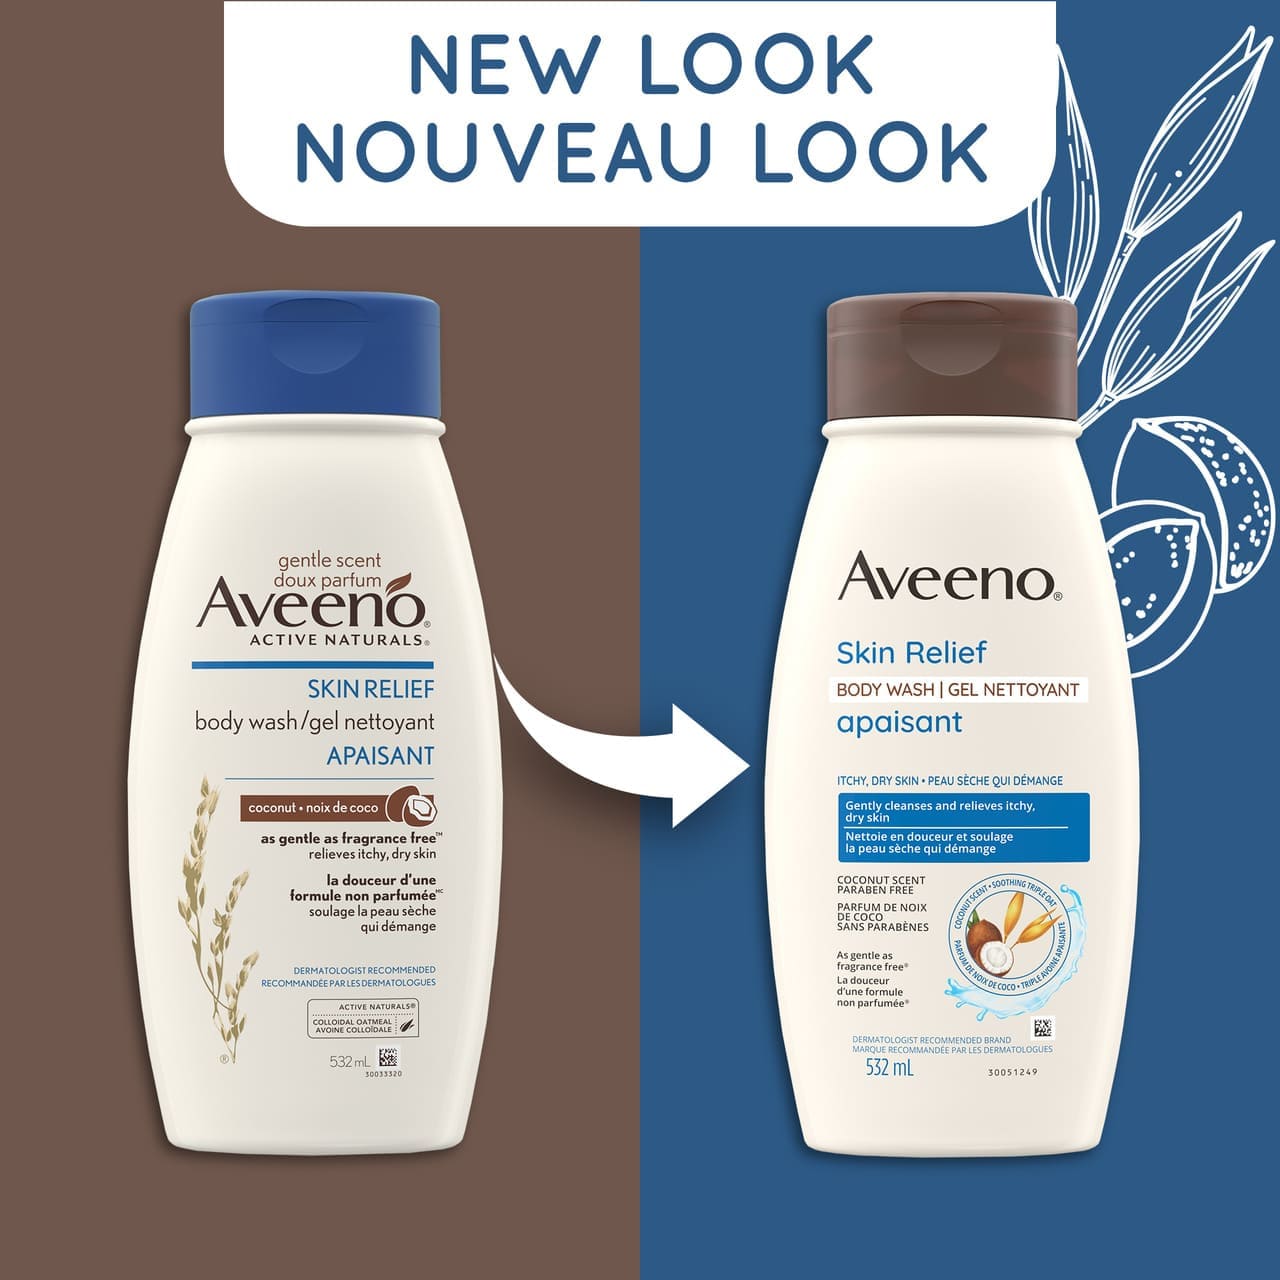 Old and new packaging of AVEENO® Skin Relief Gentle Scent Coconut Body Wash, 532mL pump bottle, with text 'new look'